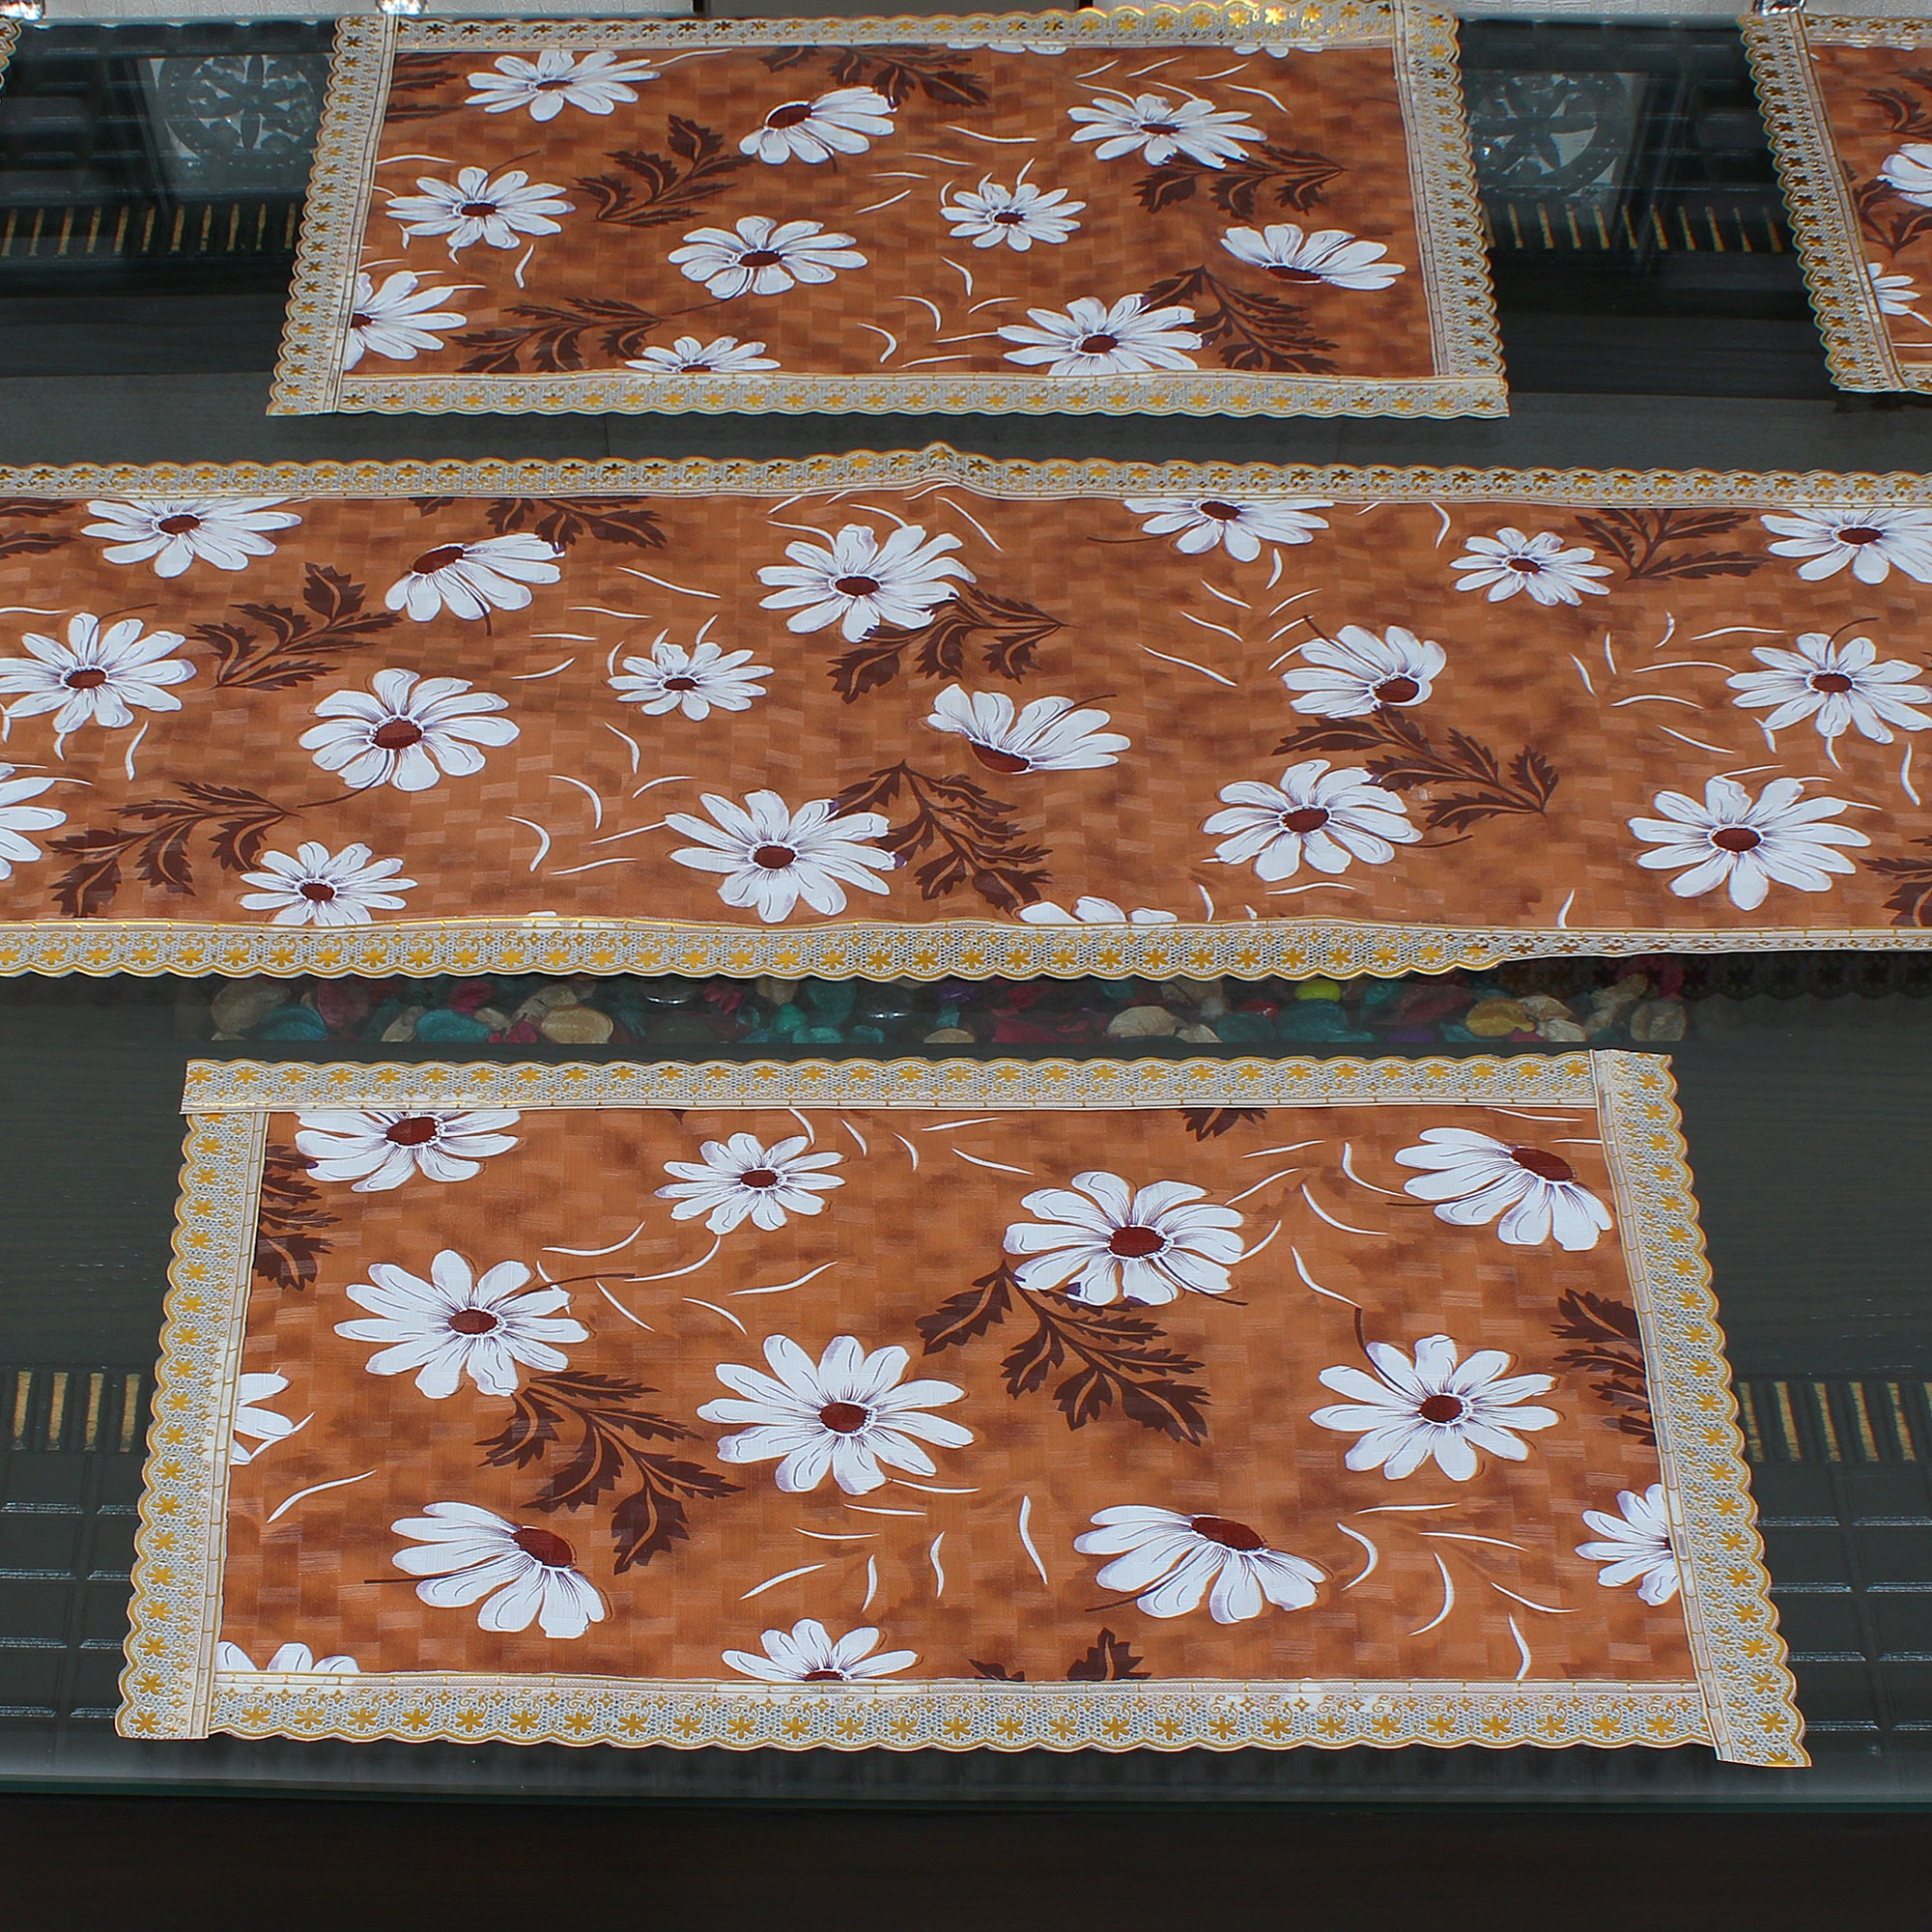 Waterproof & Dustproof Dining Table Runner With 6 Placemats, SA49 - Dream Care Furnishings Private Limited